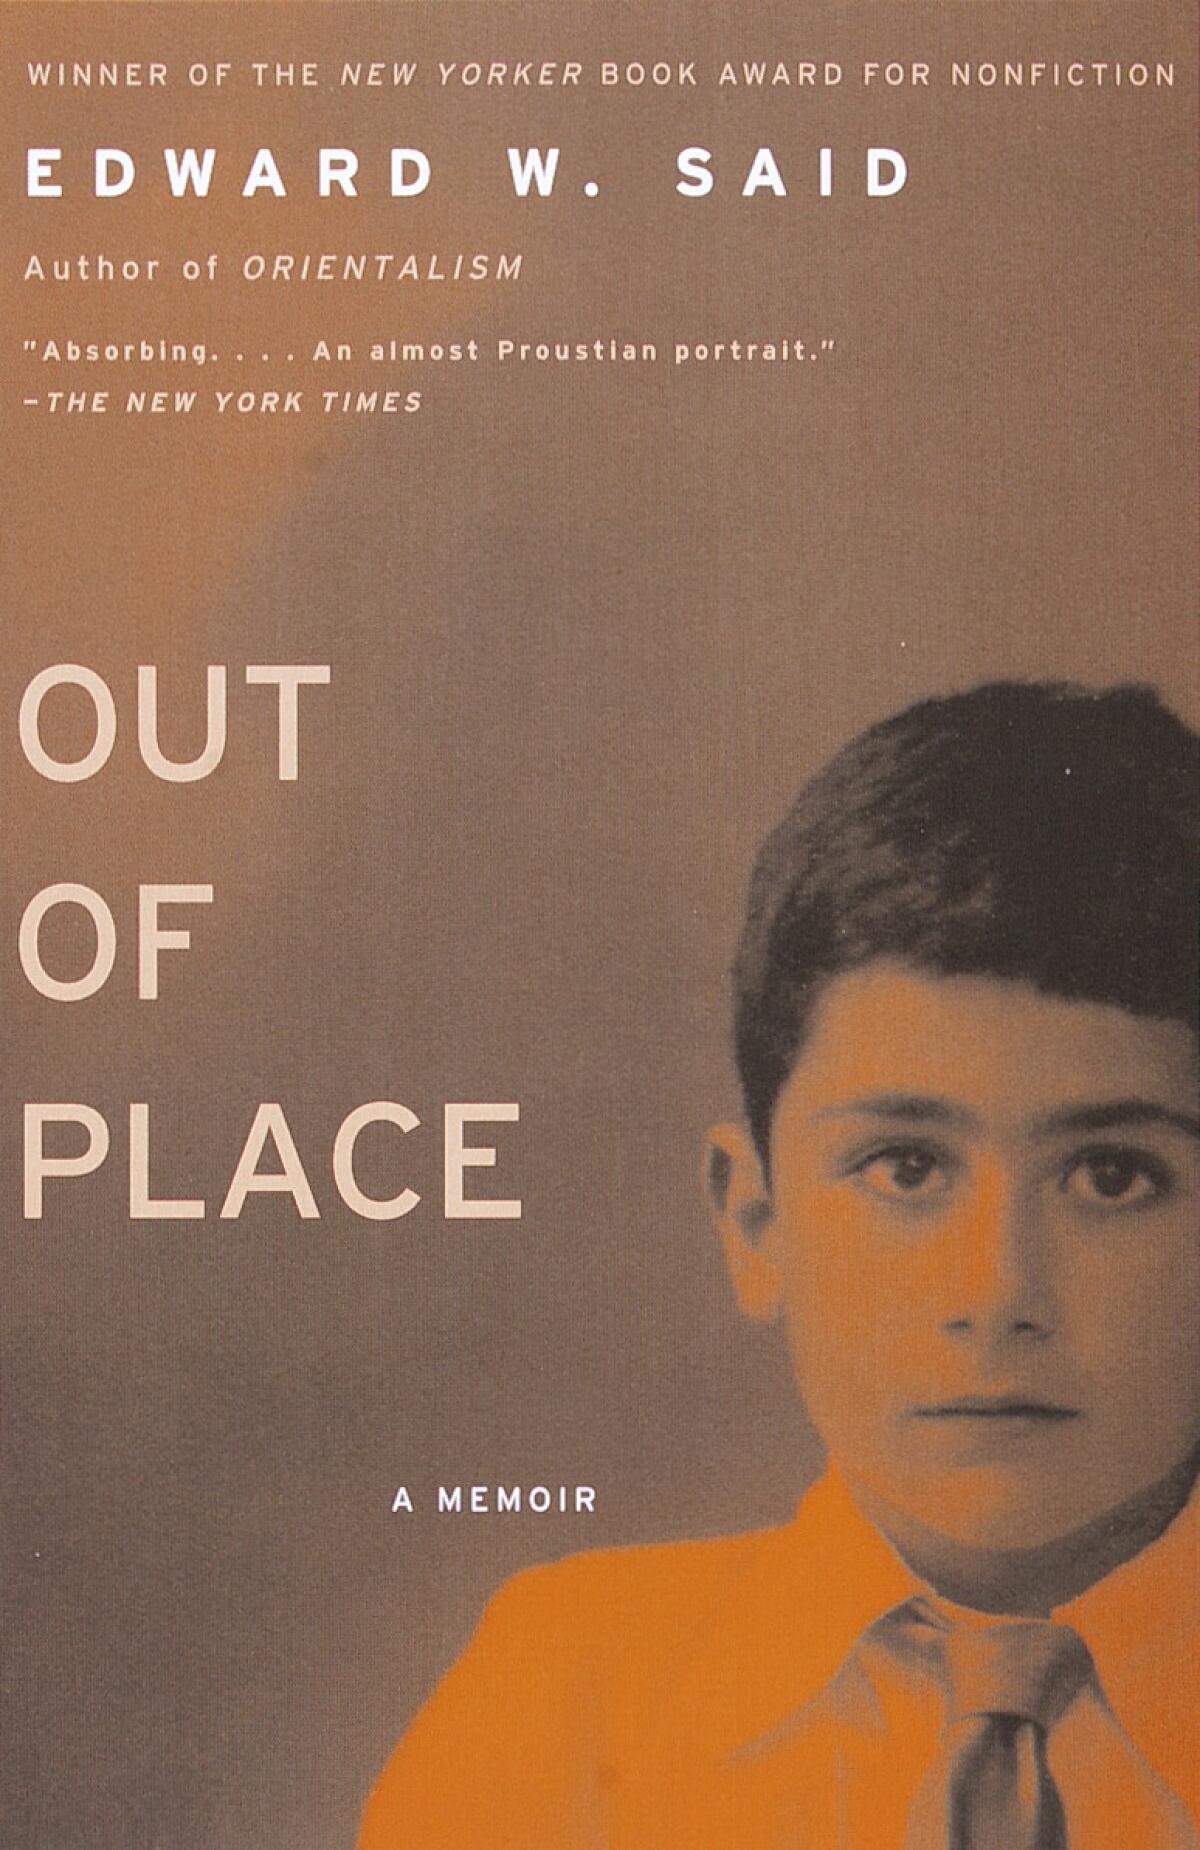 "Out of Place," by Edward Said